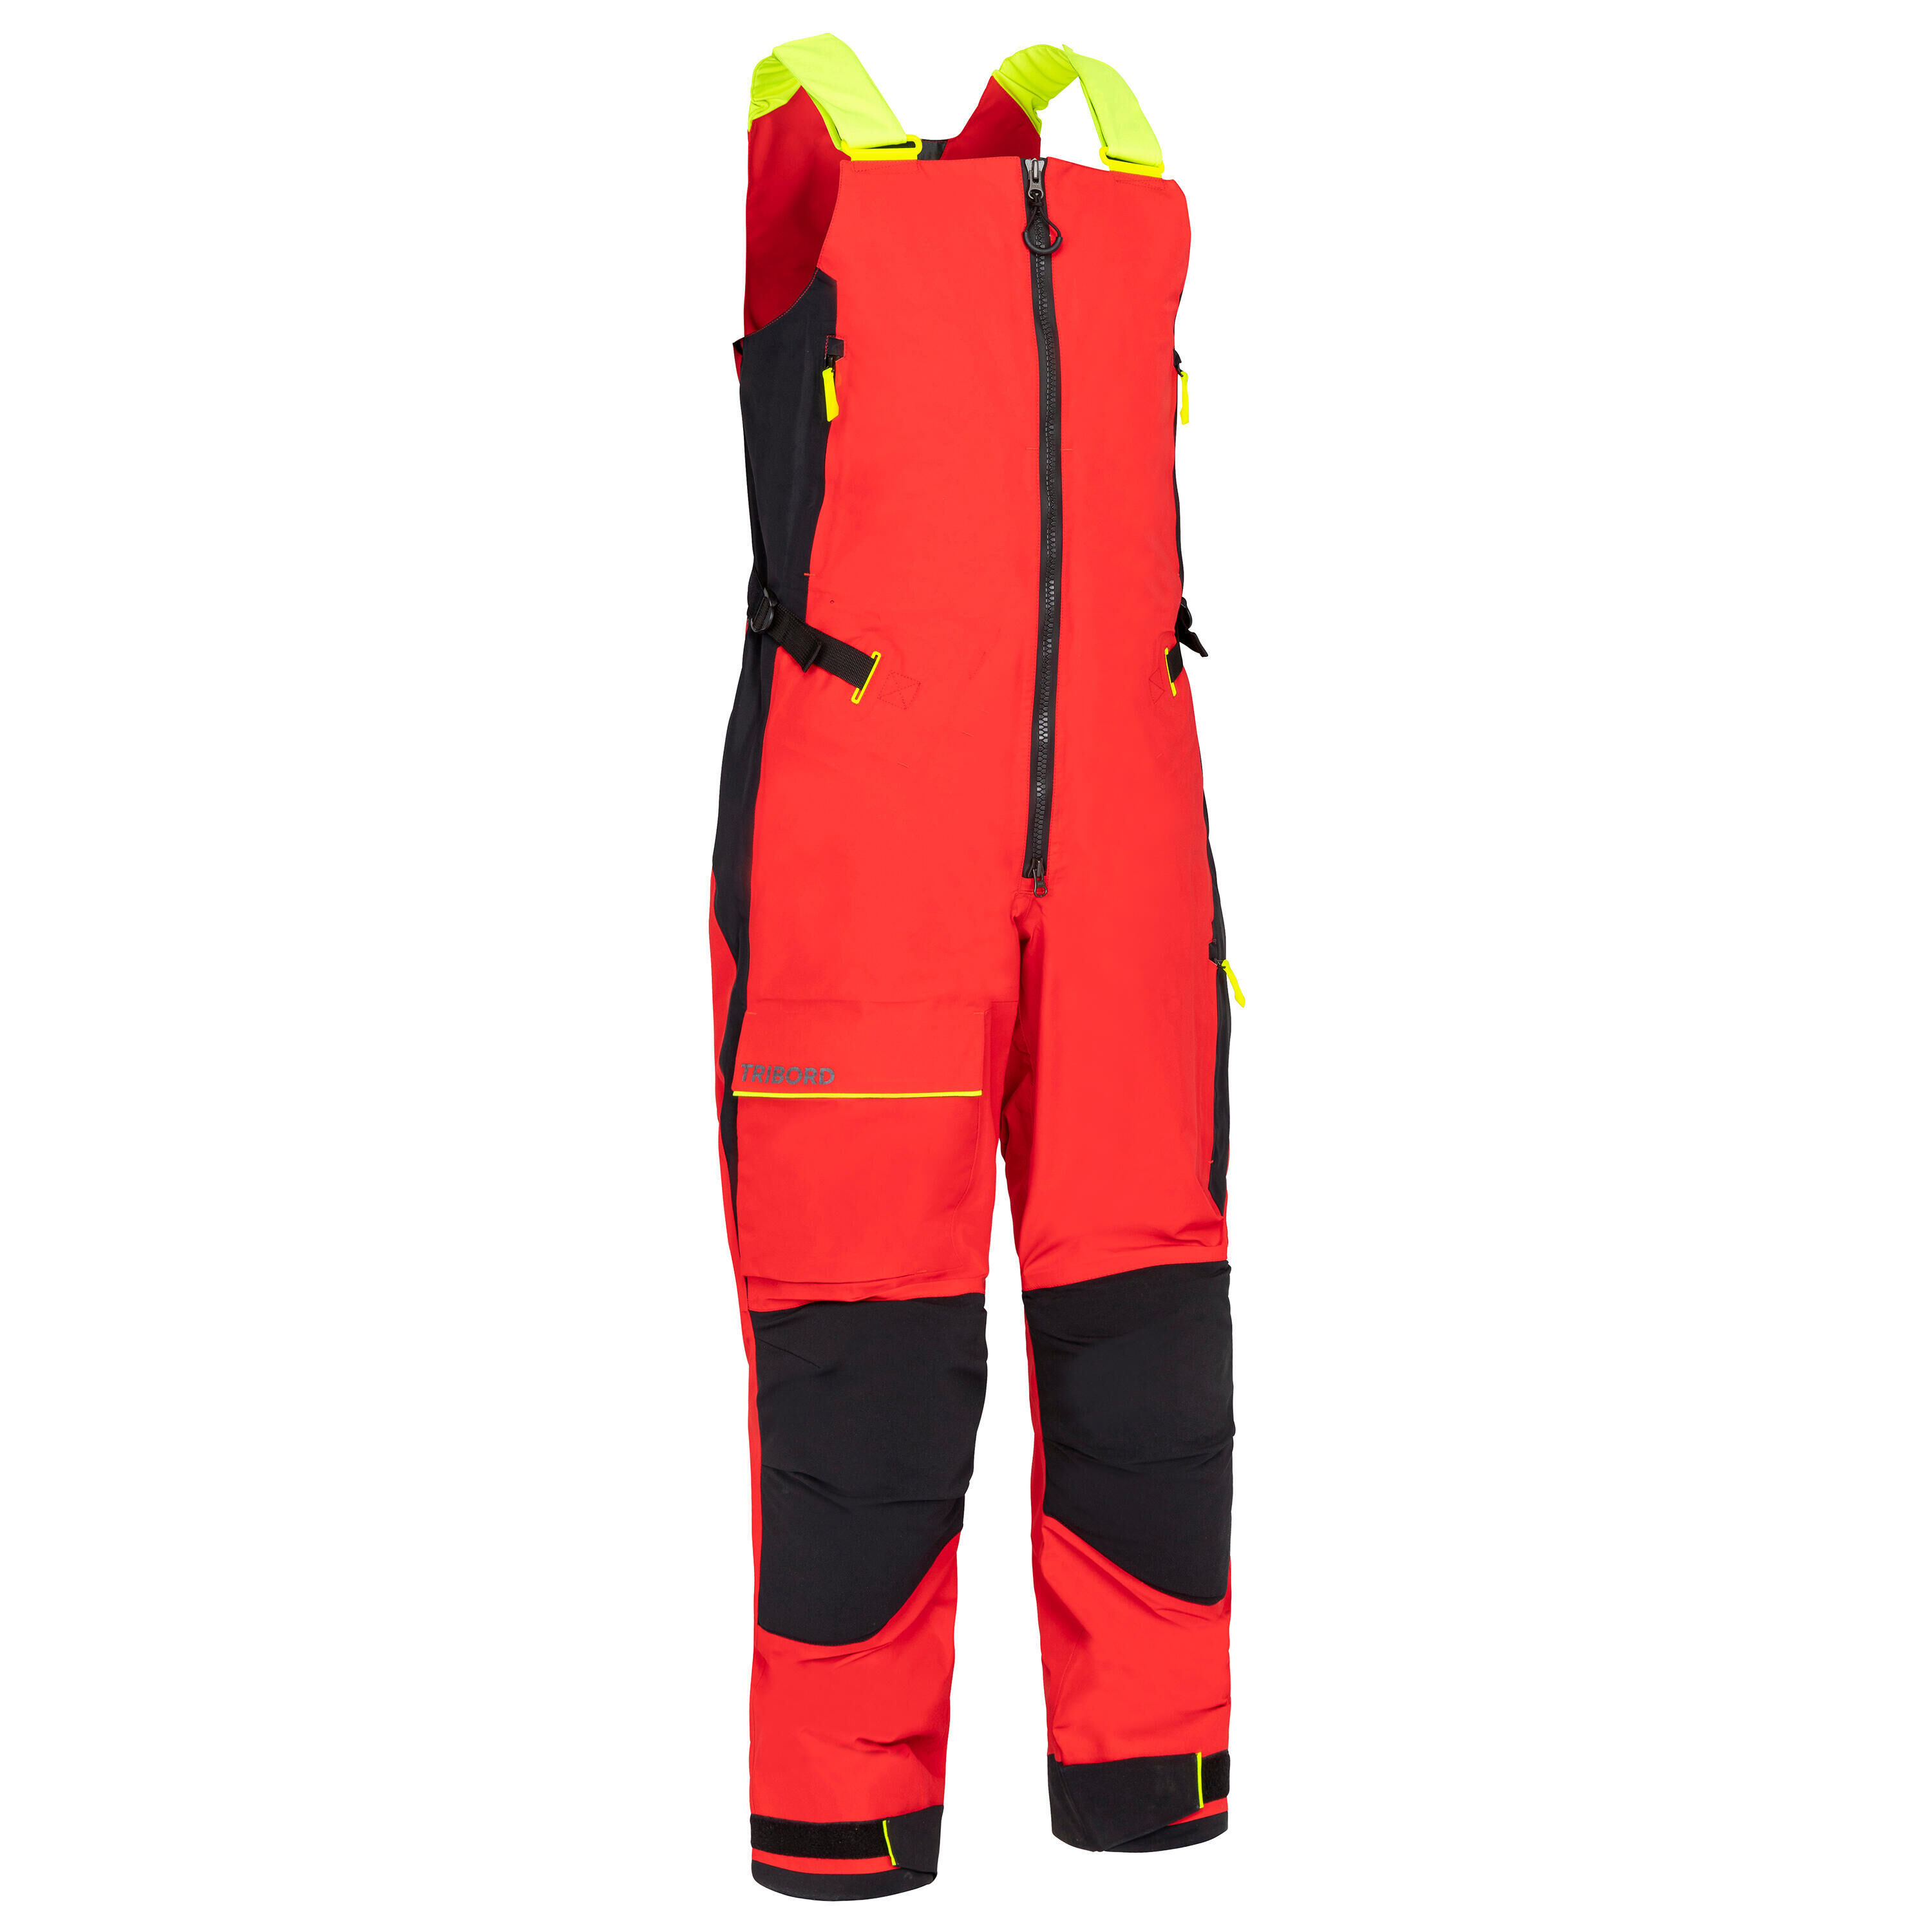 TRIBORD Refurbished Adult Sailing overalls - Offshore 900 OPEN dropseat - A Grade